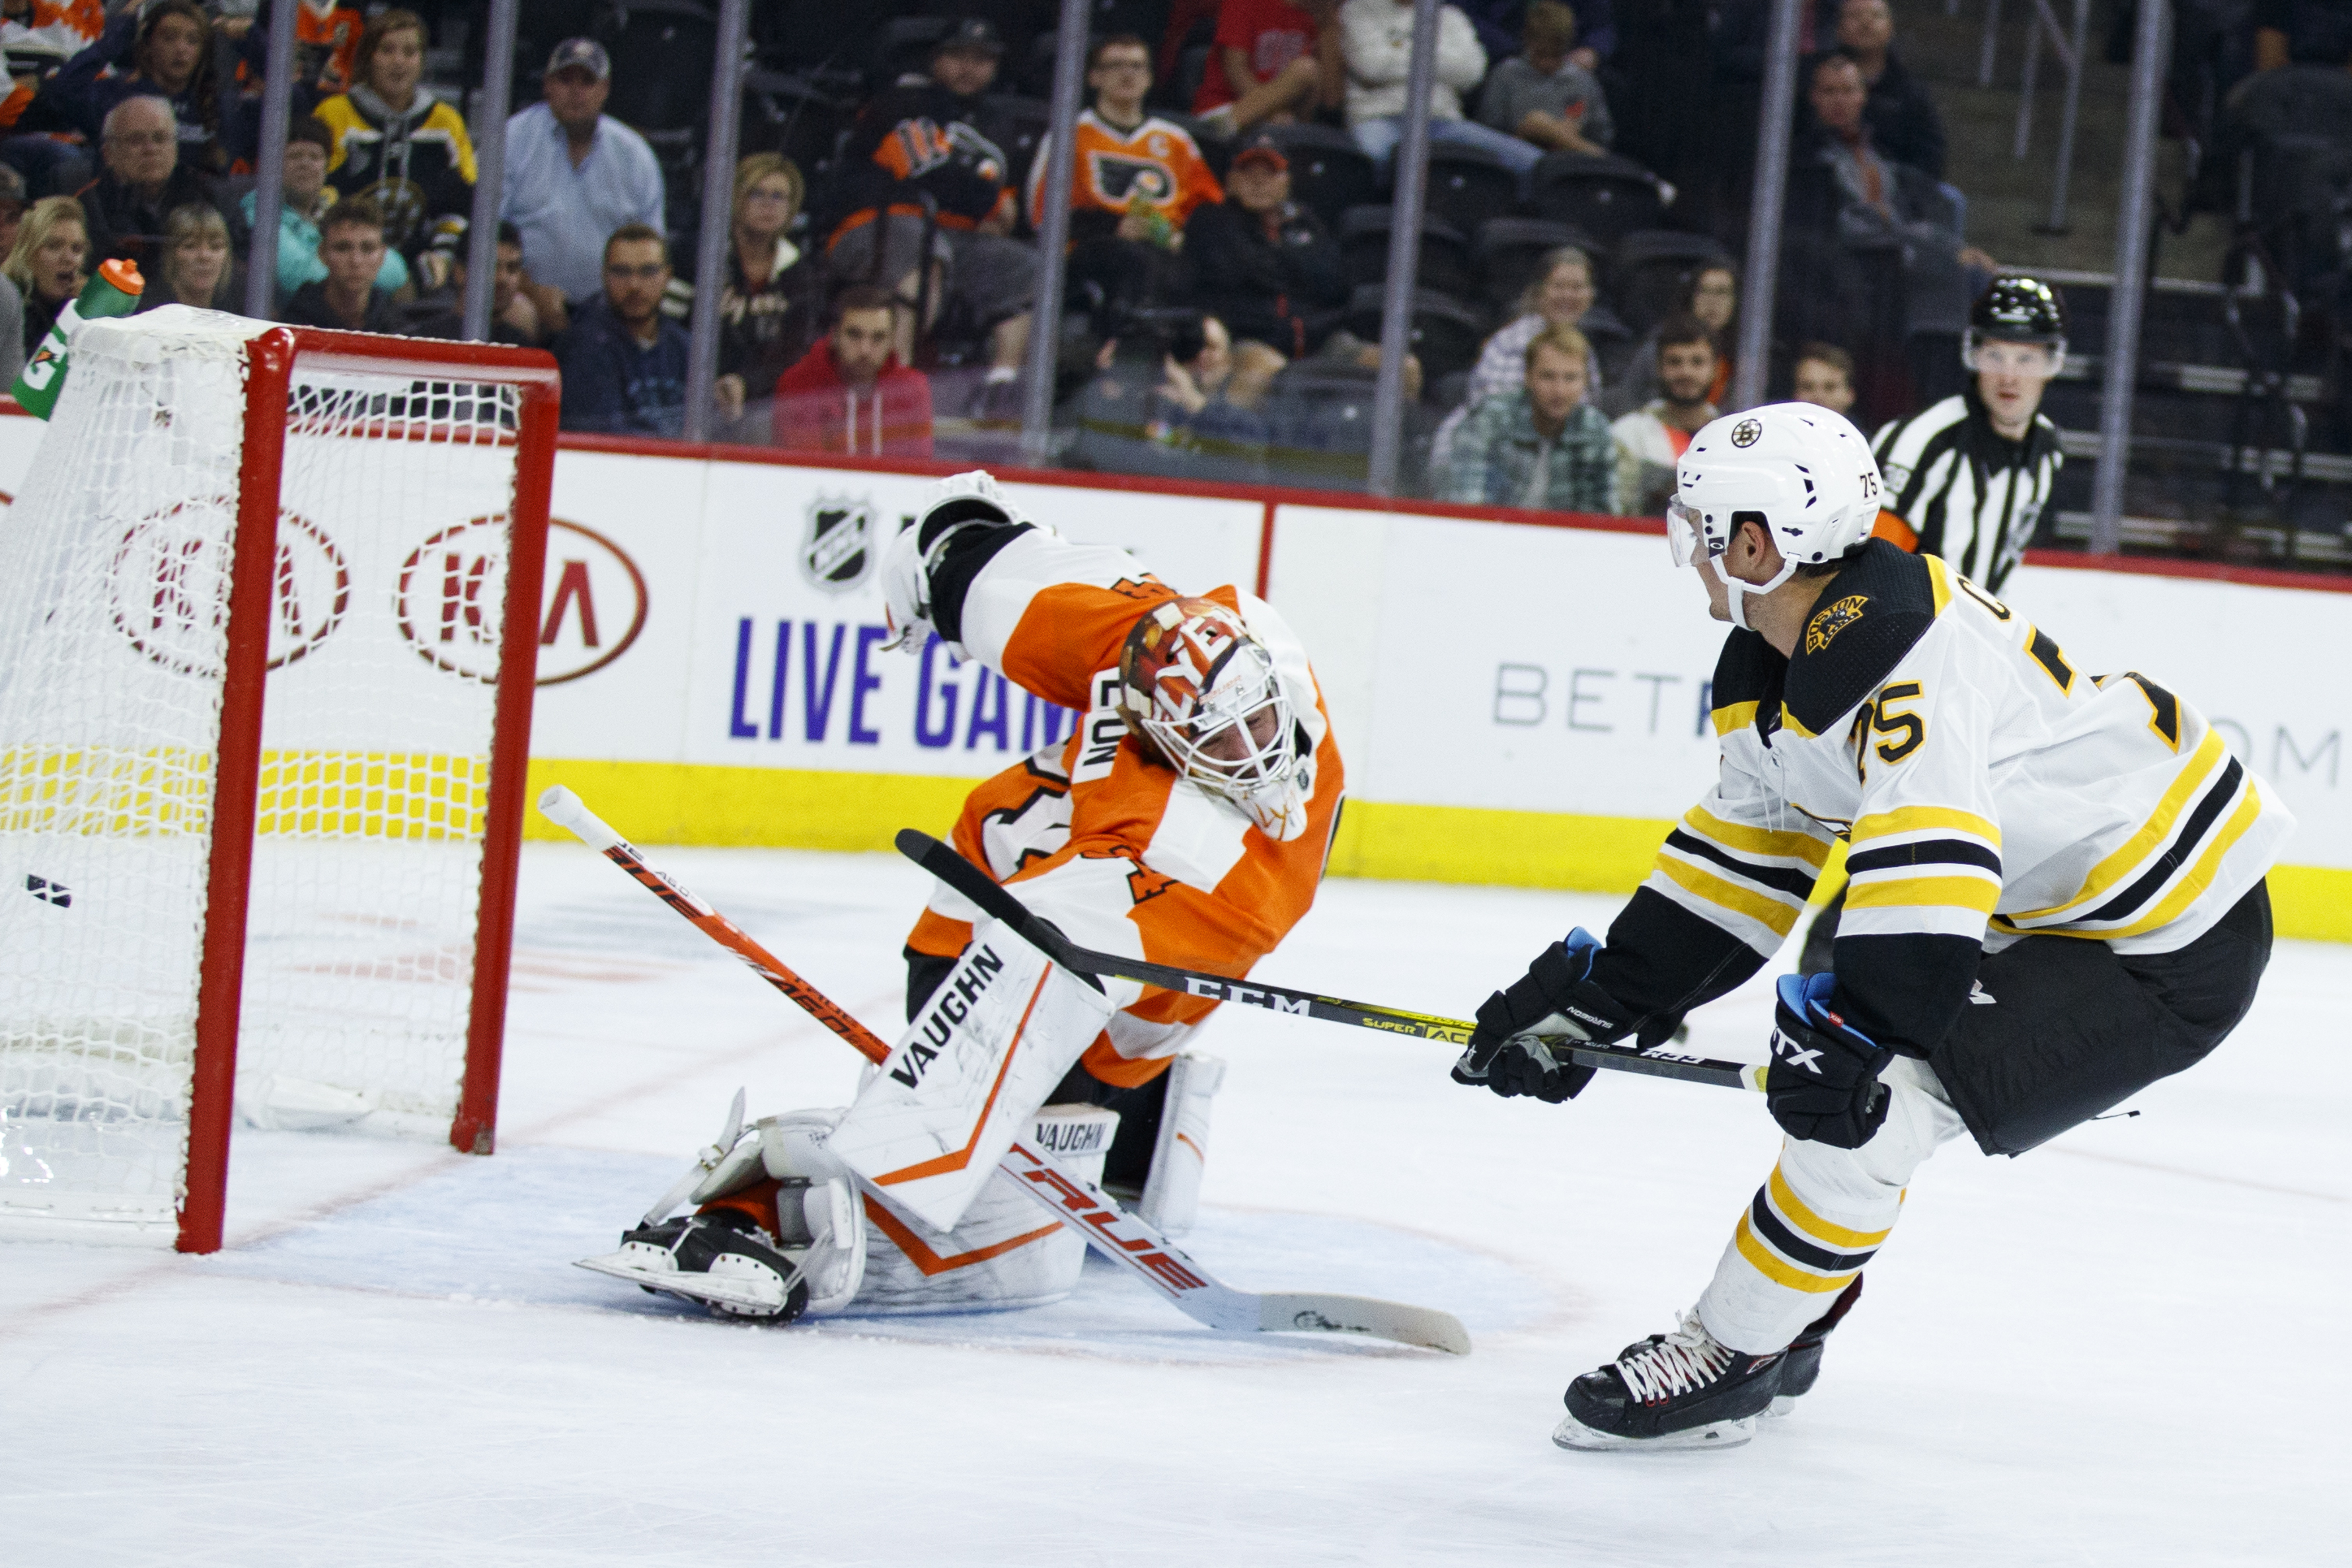 Cehlarik leads Bruins to 3-1 victory over Flyers